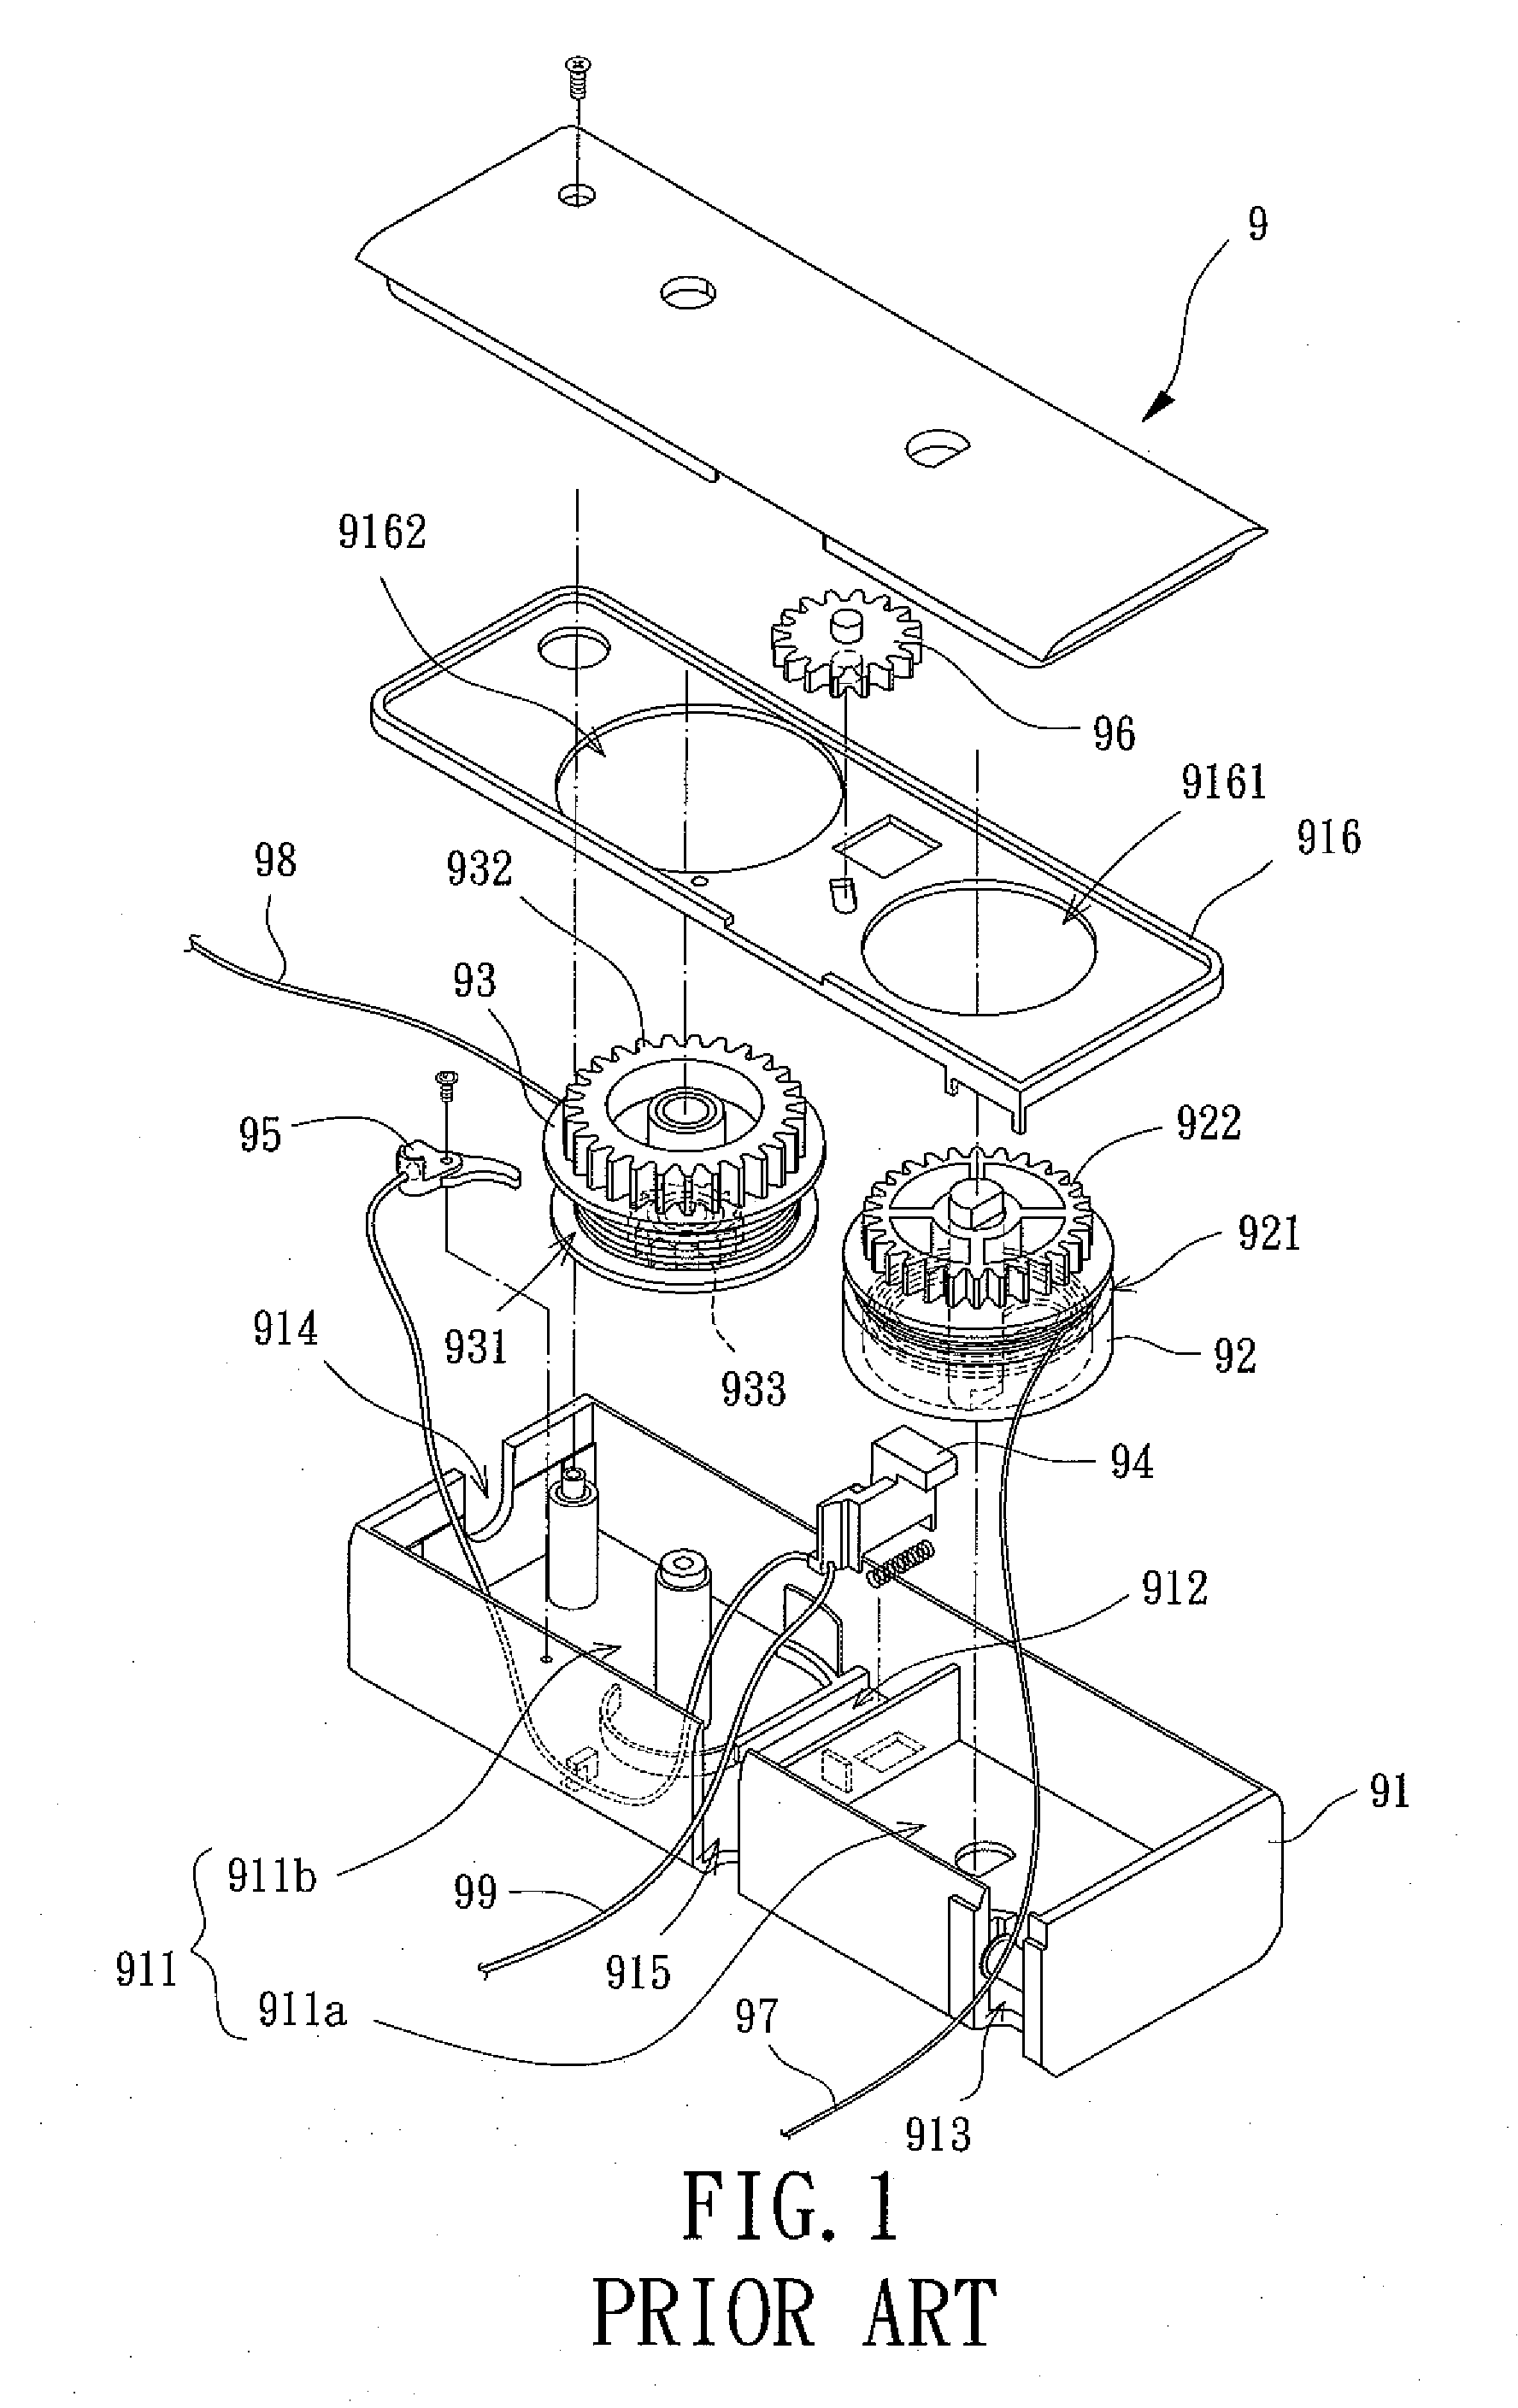 Control Device for folding/unfolding Window Shade